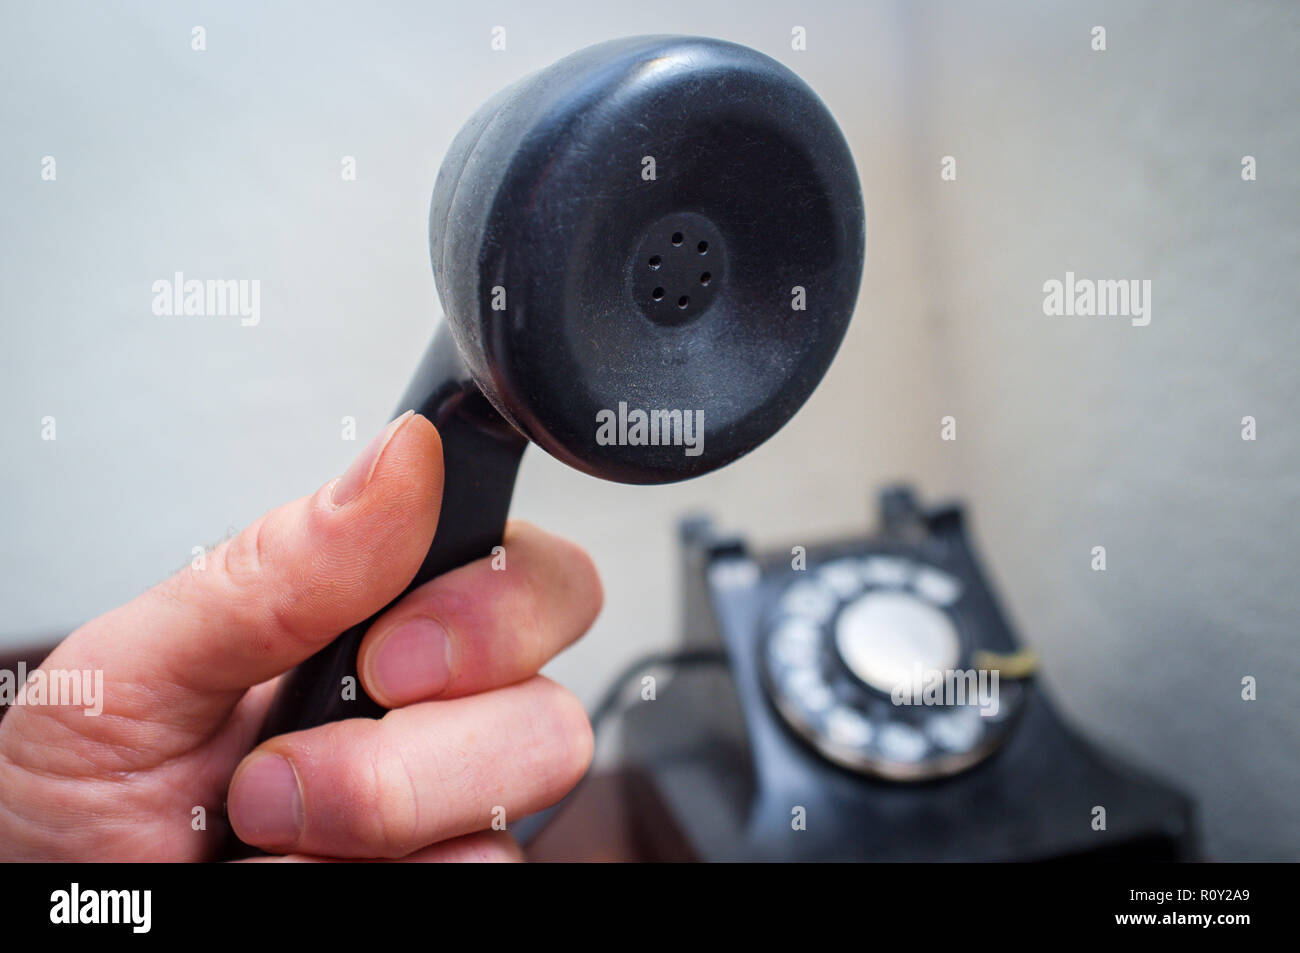 Old vintage rotary dial telephone on wooden desk Stock Photo